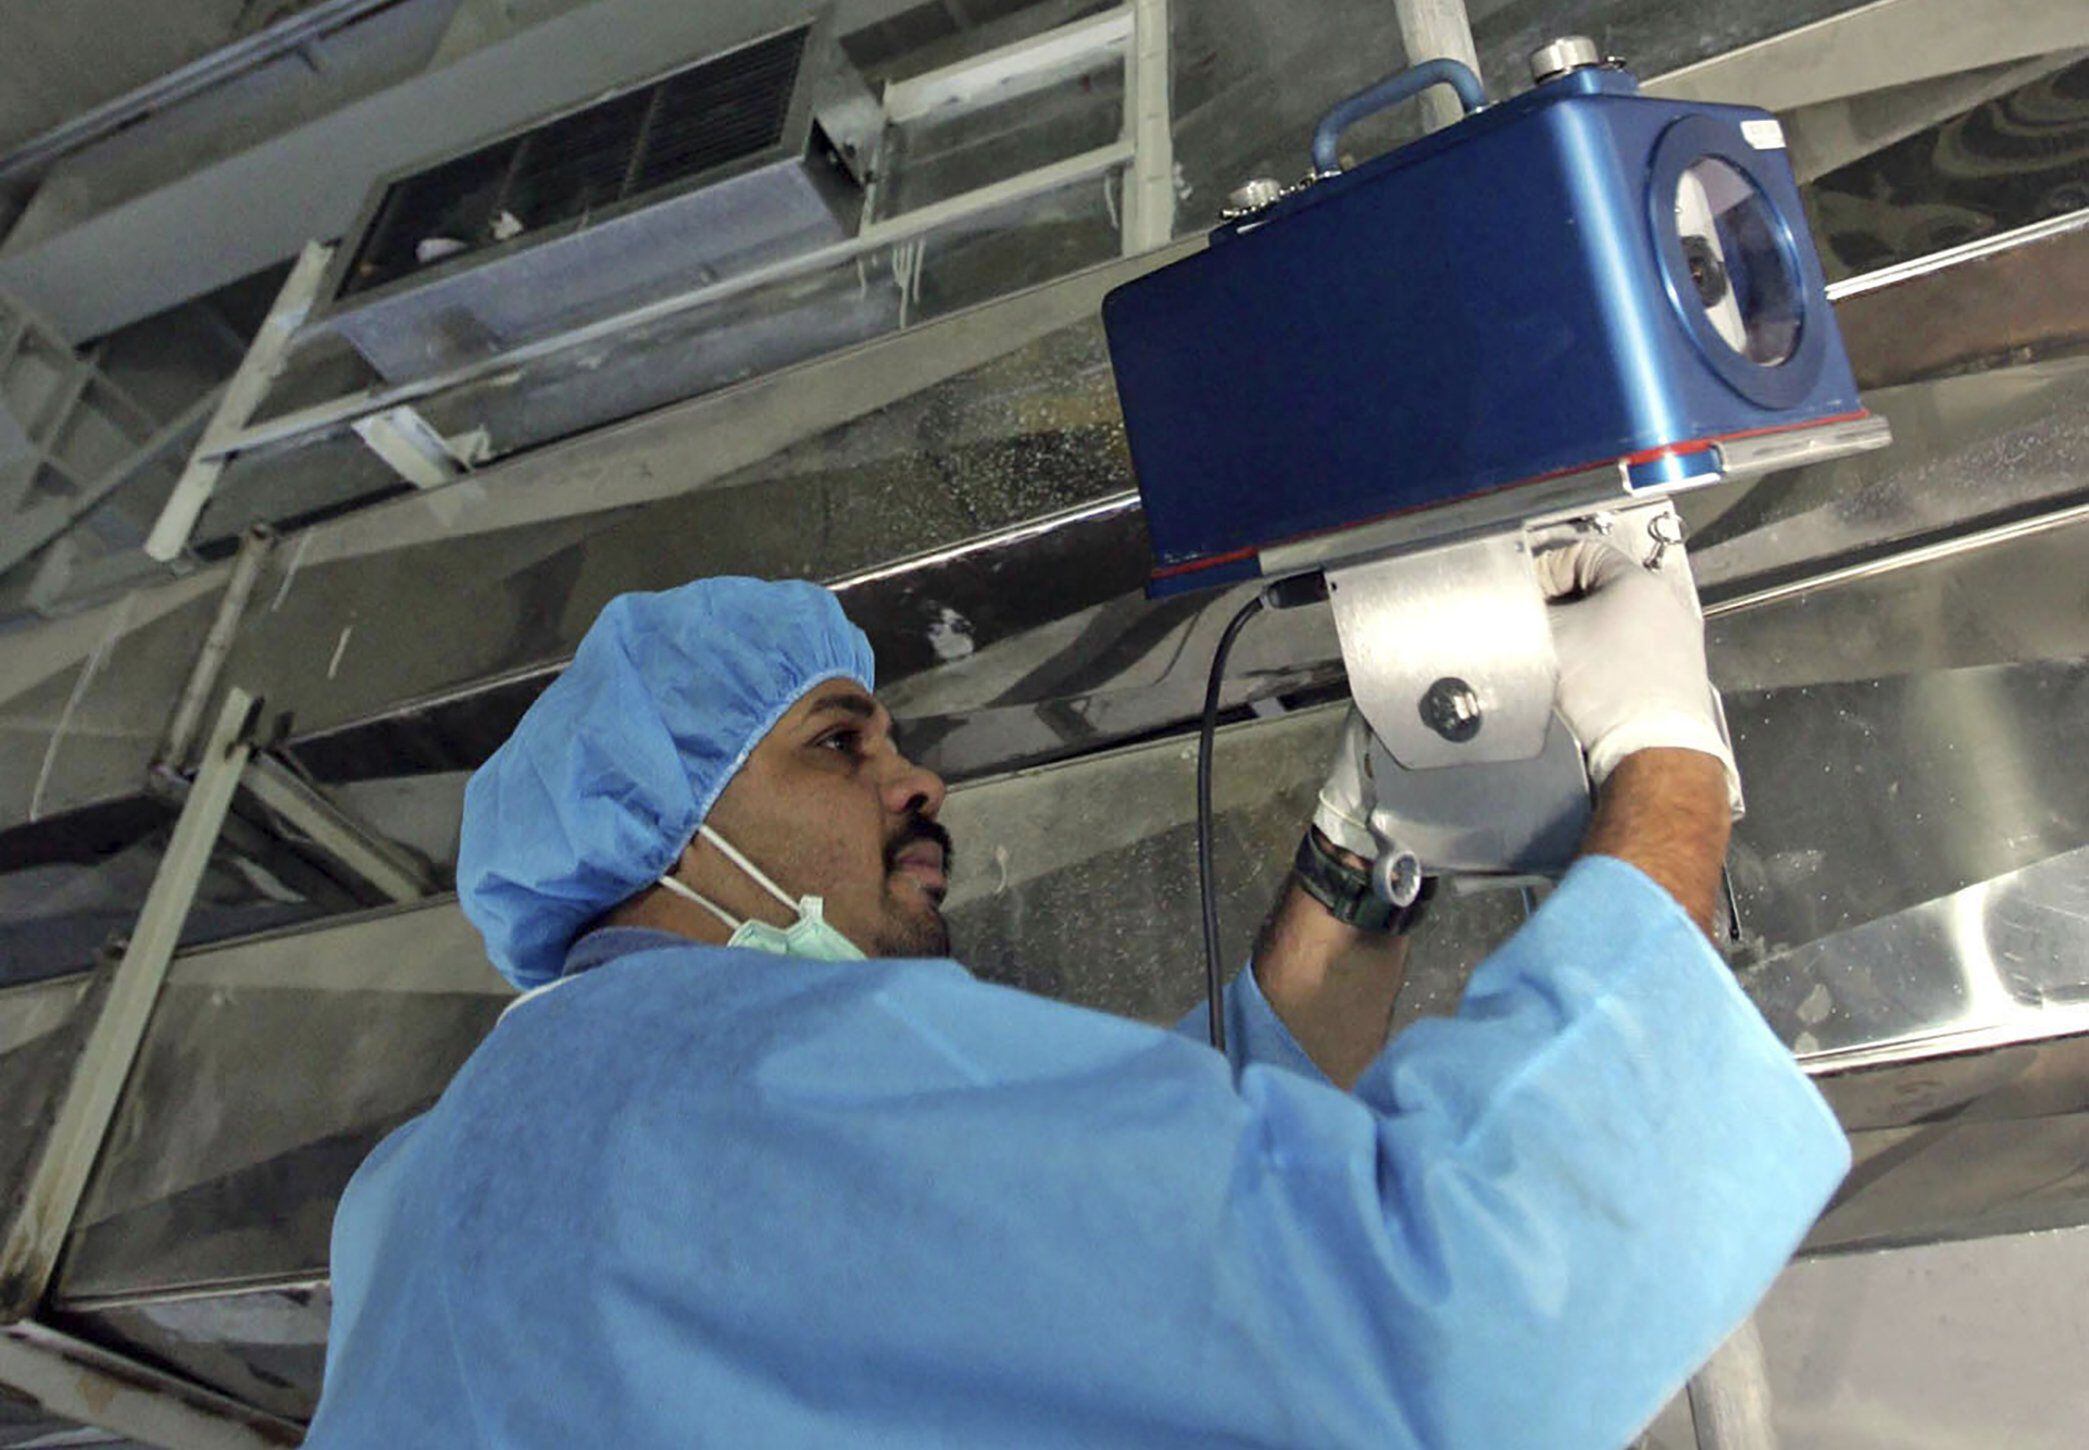 An inspector from the International Atomic Energy Agency sets up surveillance equipment at Iran's Uranium Conversion Facility outside the city of Isfahan, Iran, in August 2005. (Photo: AP)